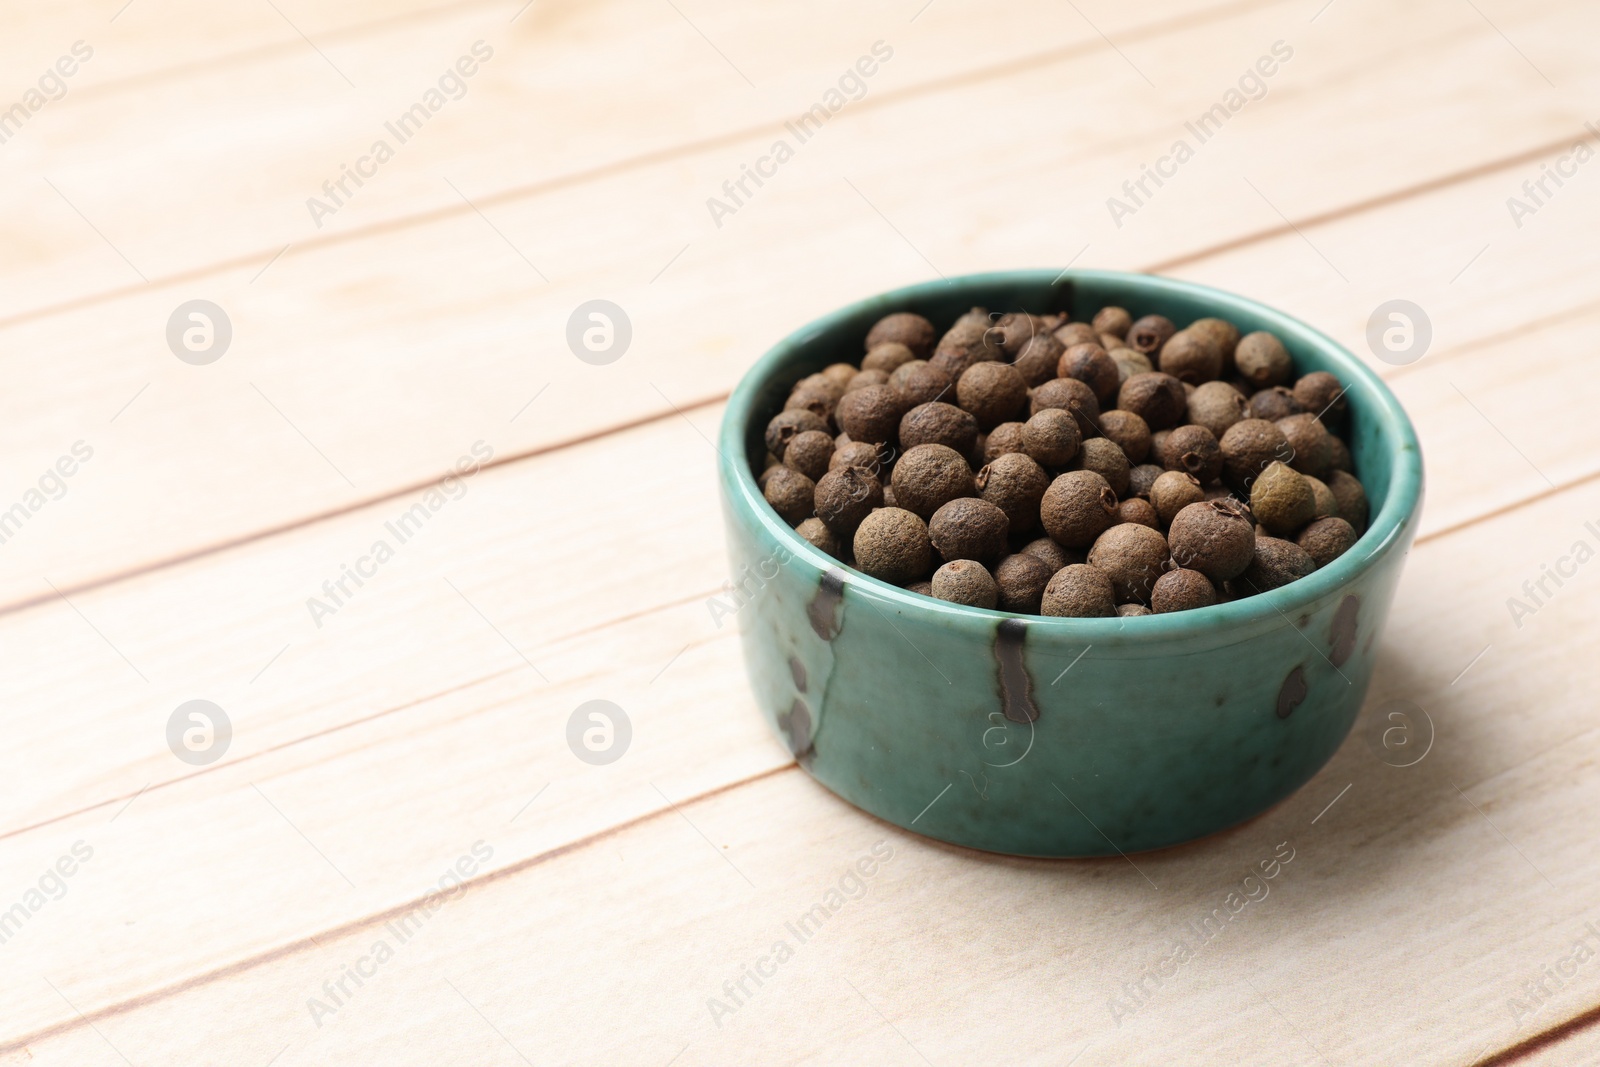 Photo of Dry allspice berries (Jamaica pepper) in bowl on light wooden table, space for text